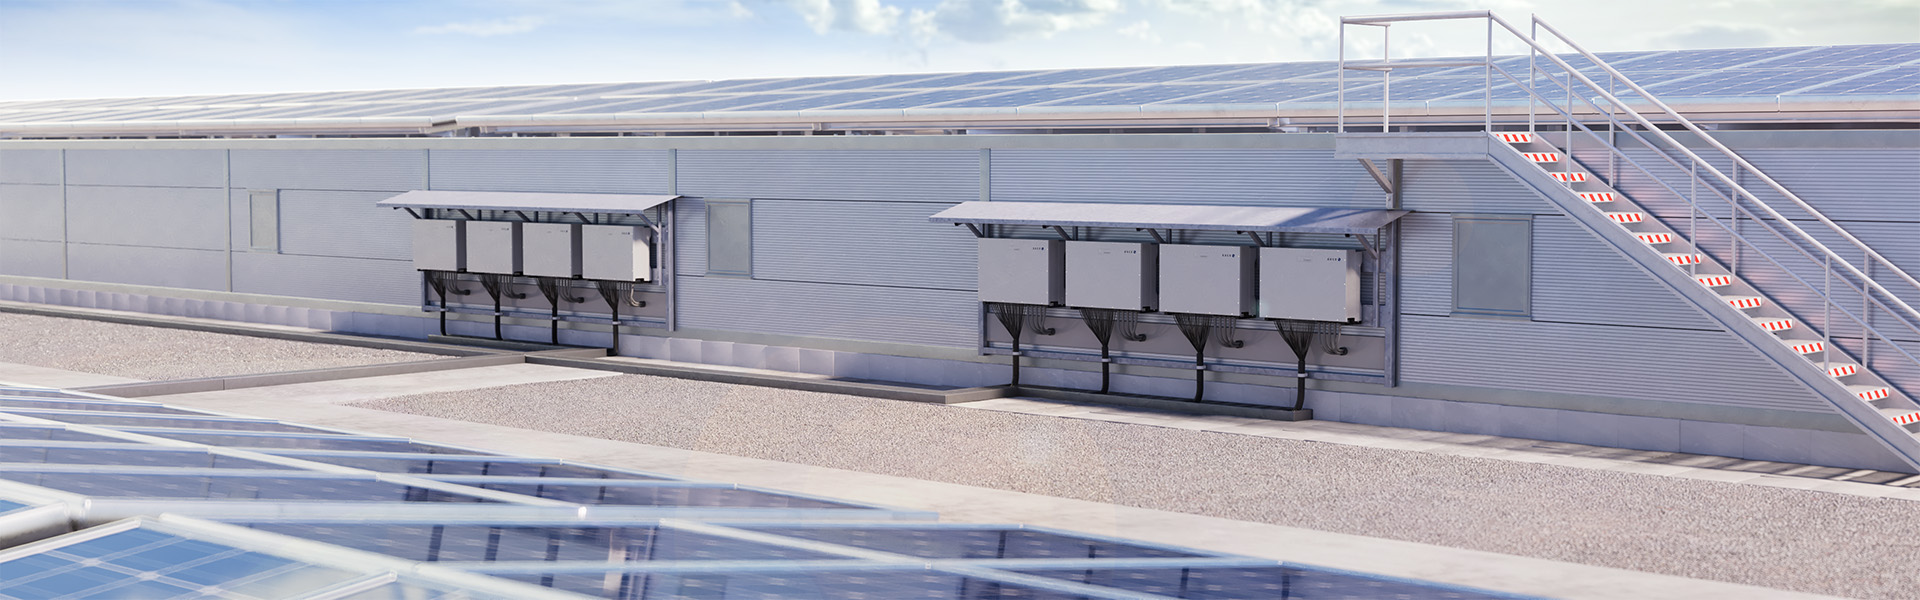 Header Commercial Flat Roof